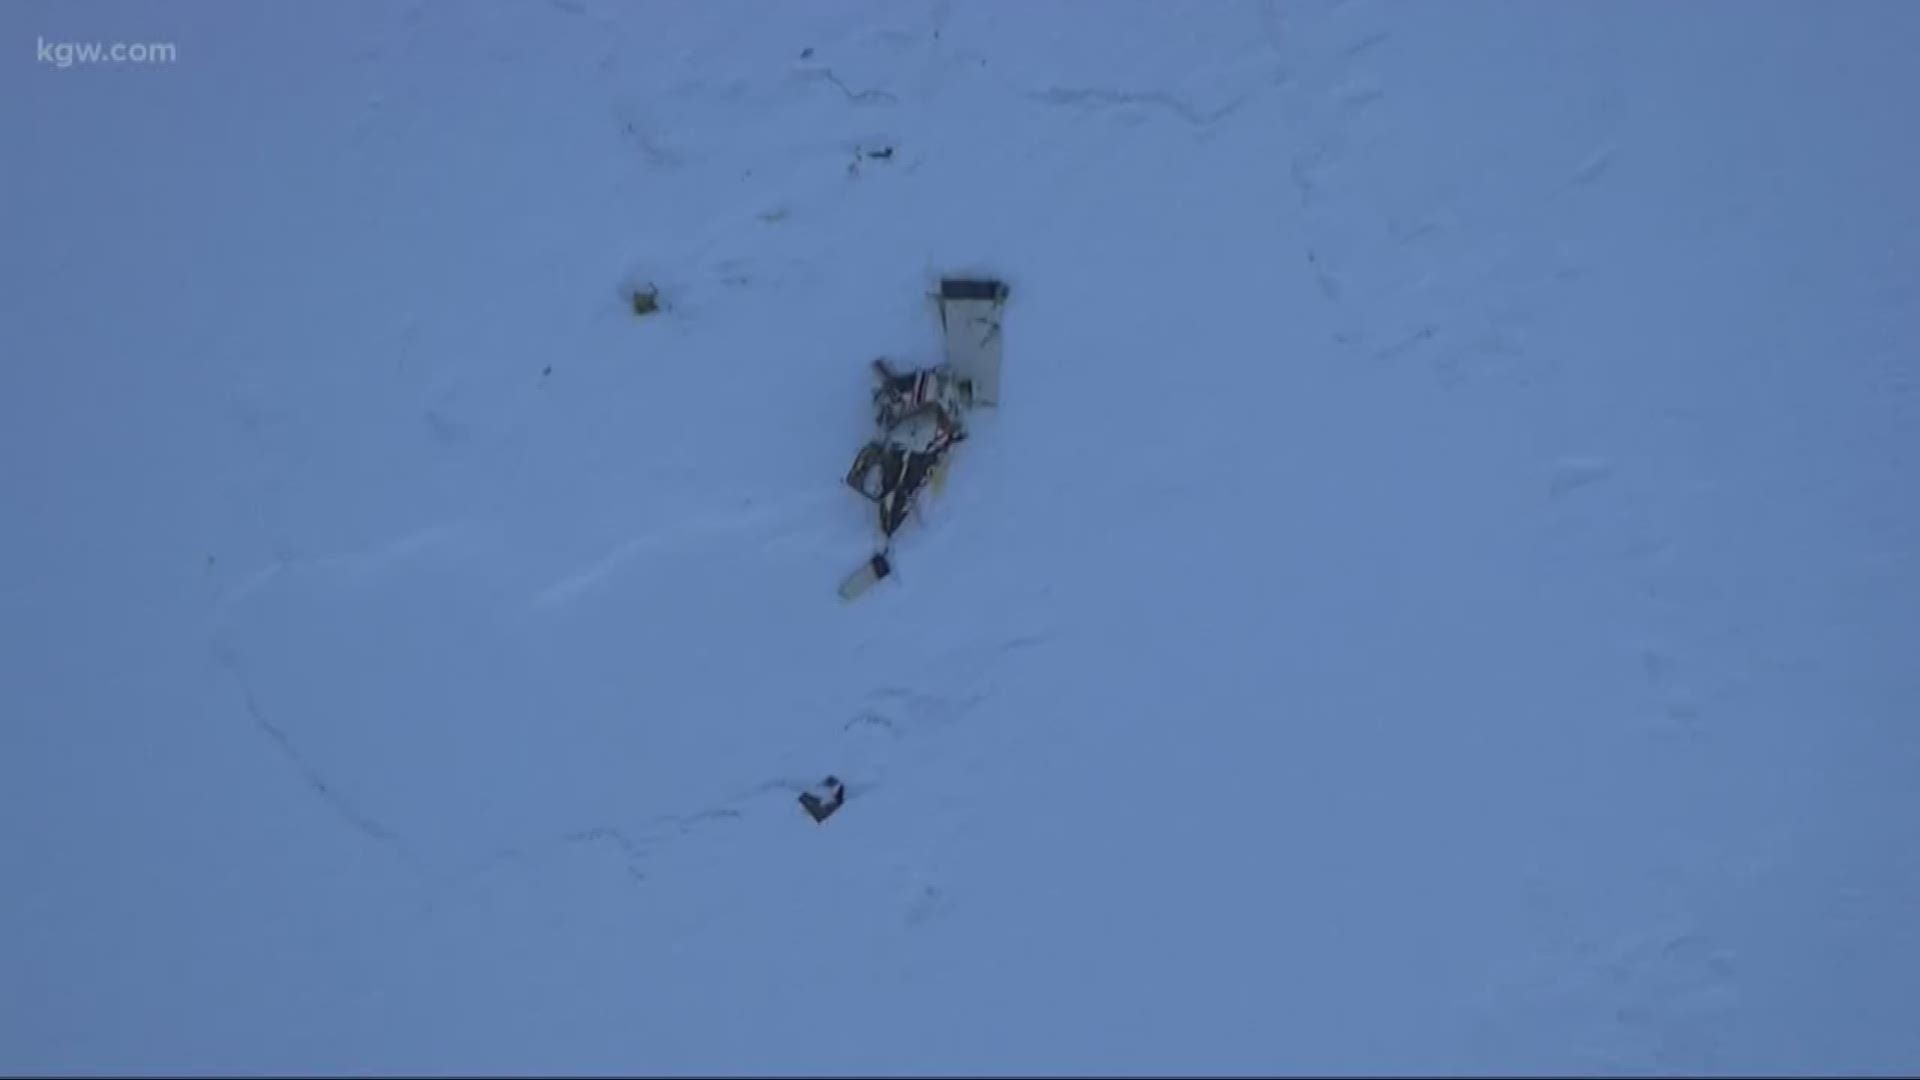 Rescuers recovered the body of a pilot who crashed his small plane on Mount Hood.